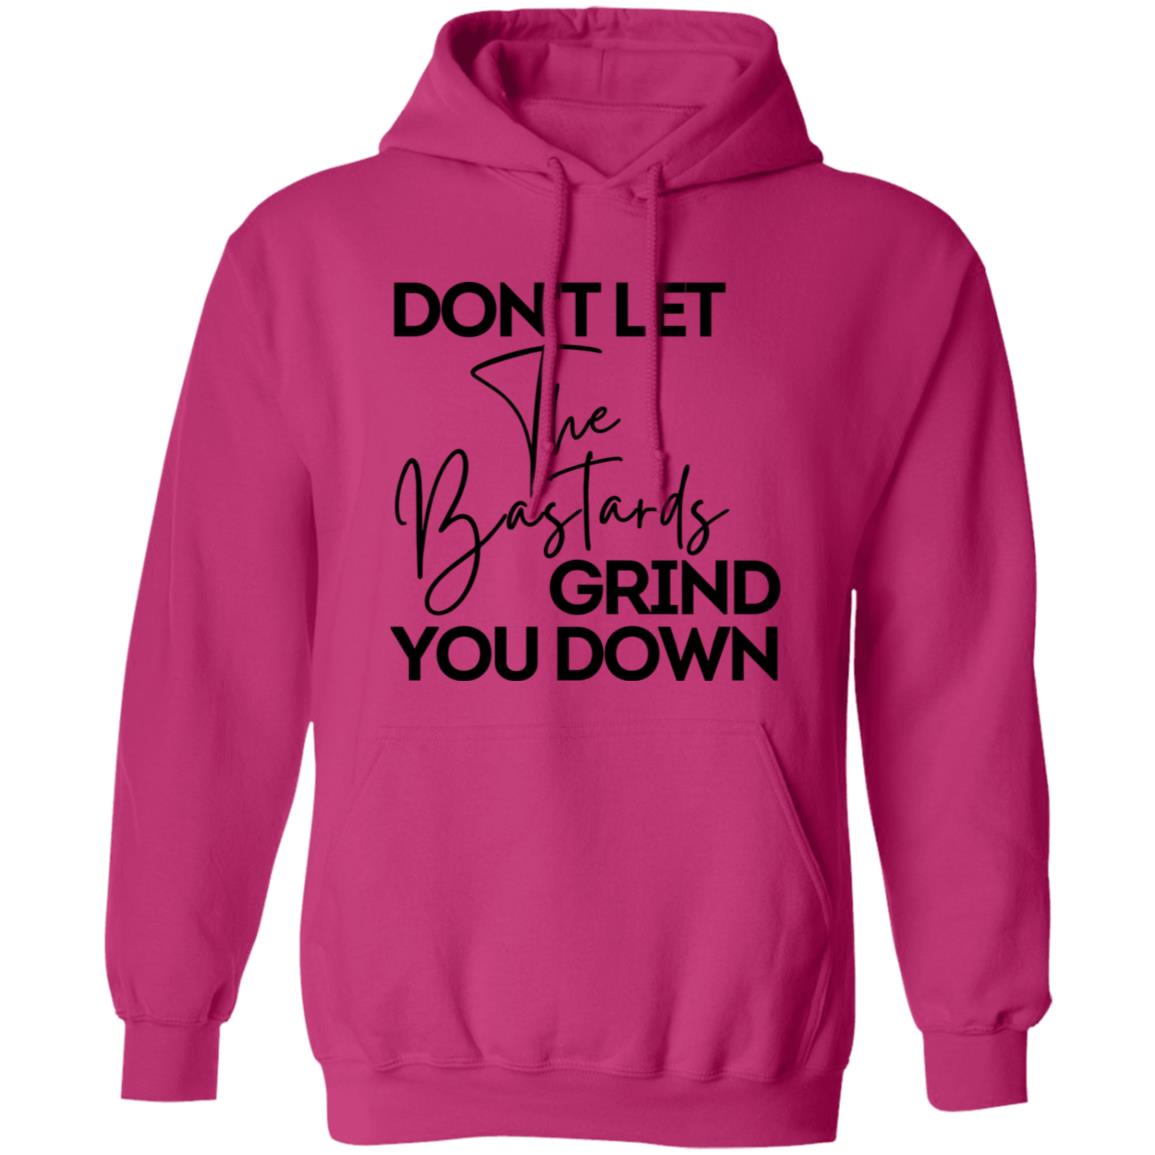 Don't Let The Bastards Grind You Down Hooded Sweatshirt